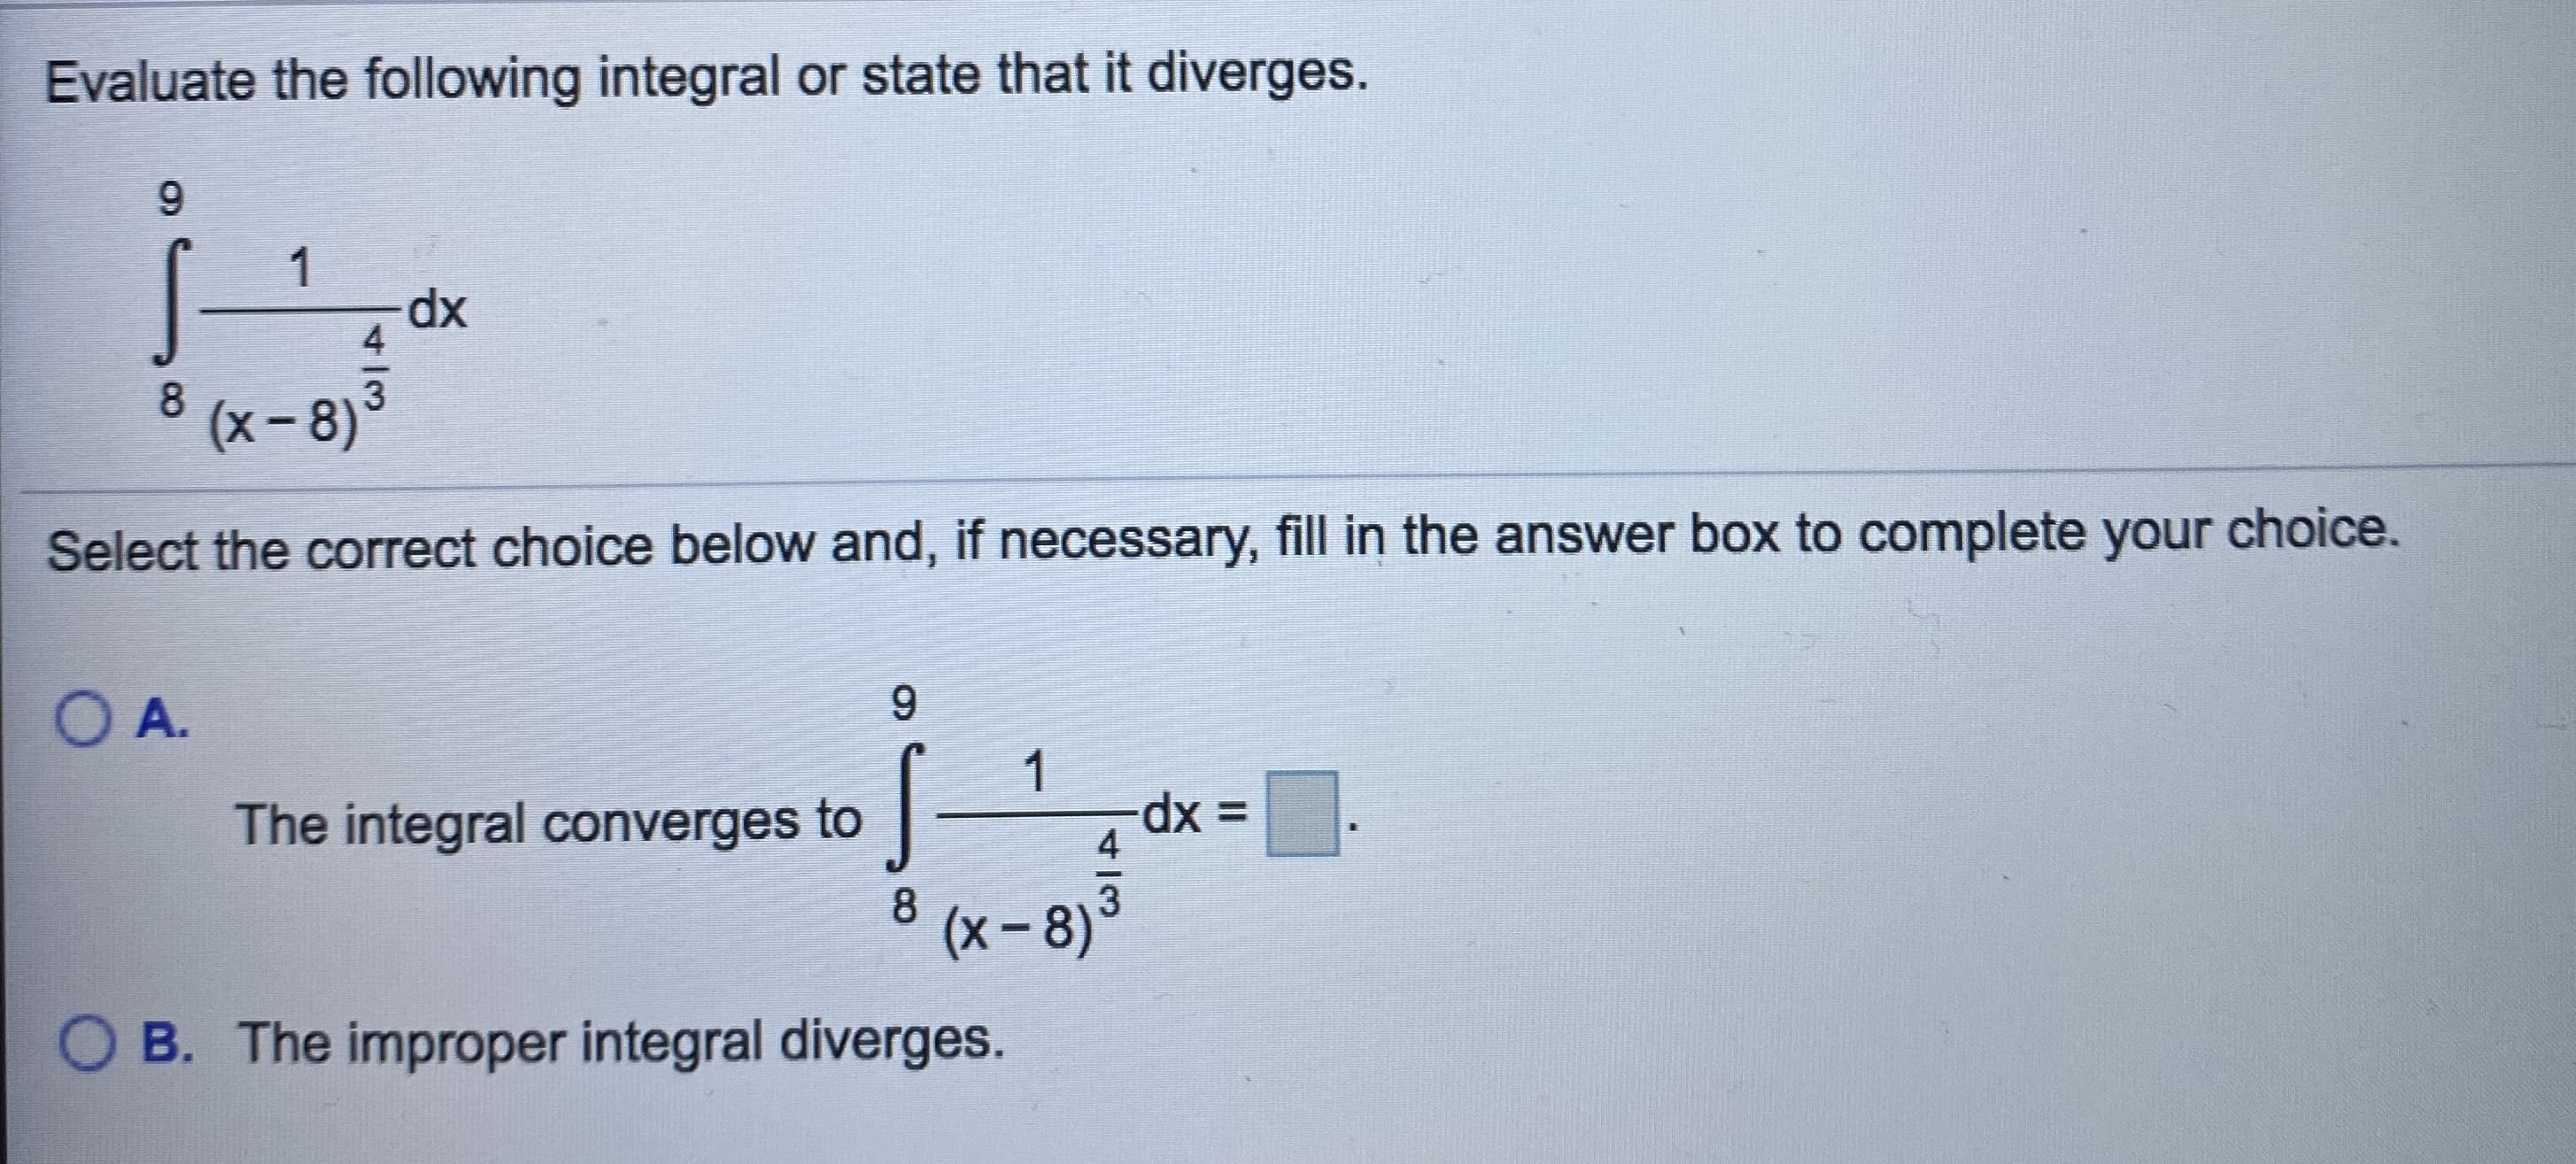 Evaluate the following integral or state that it diverges.
9.
1
dx
8 (x-8)
4/3
